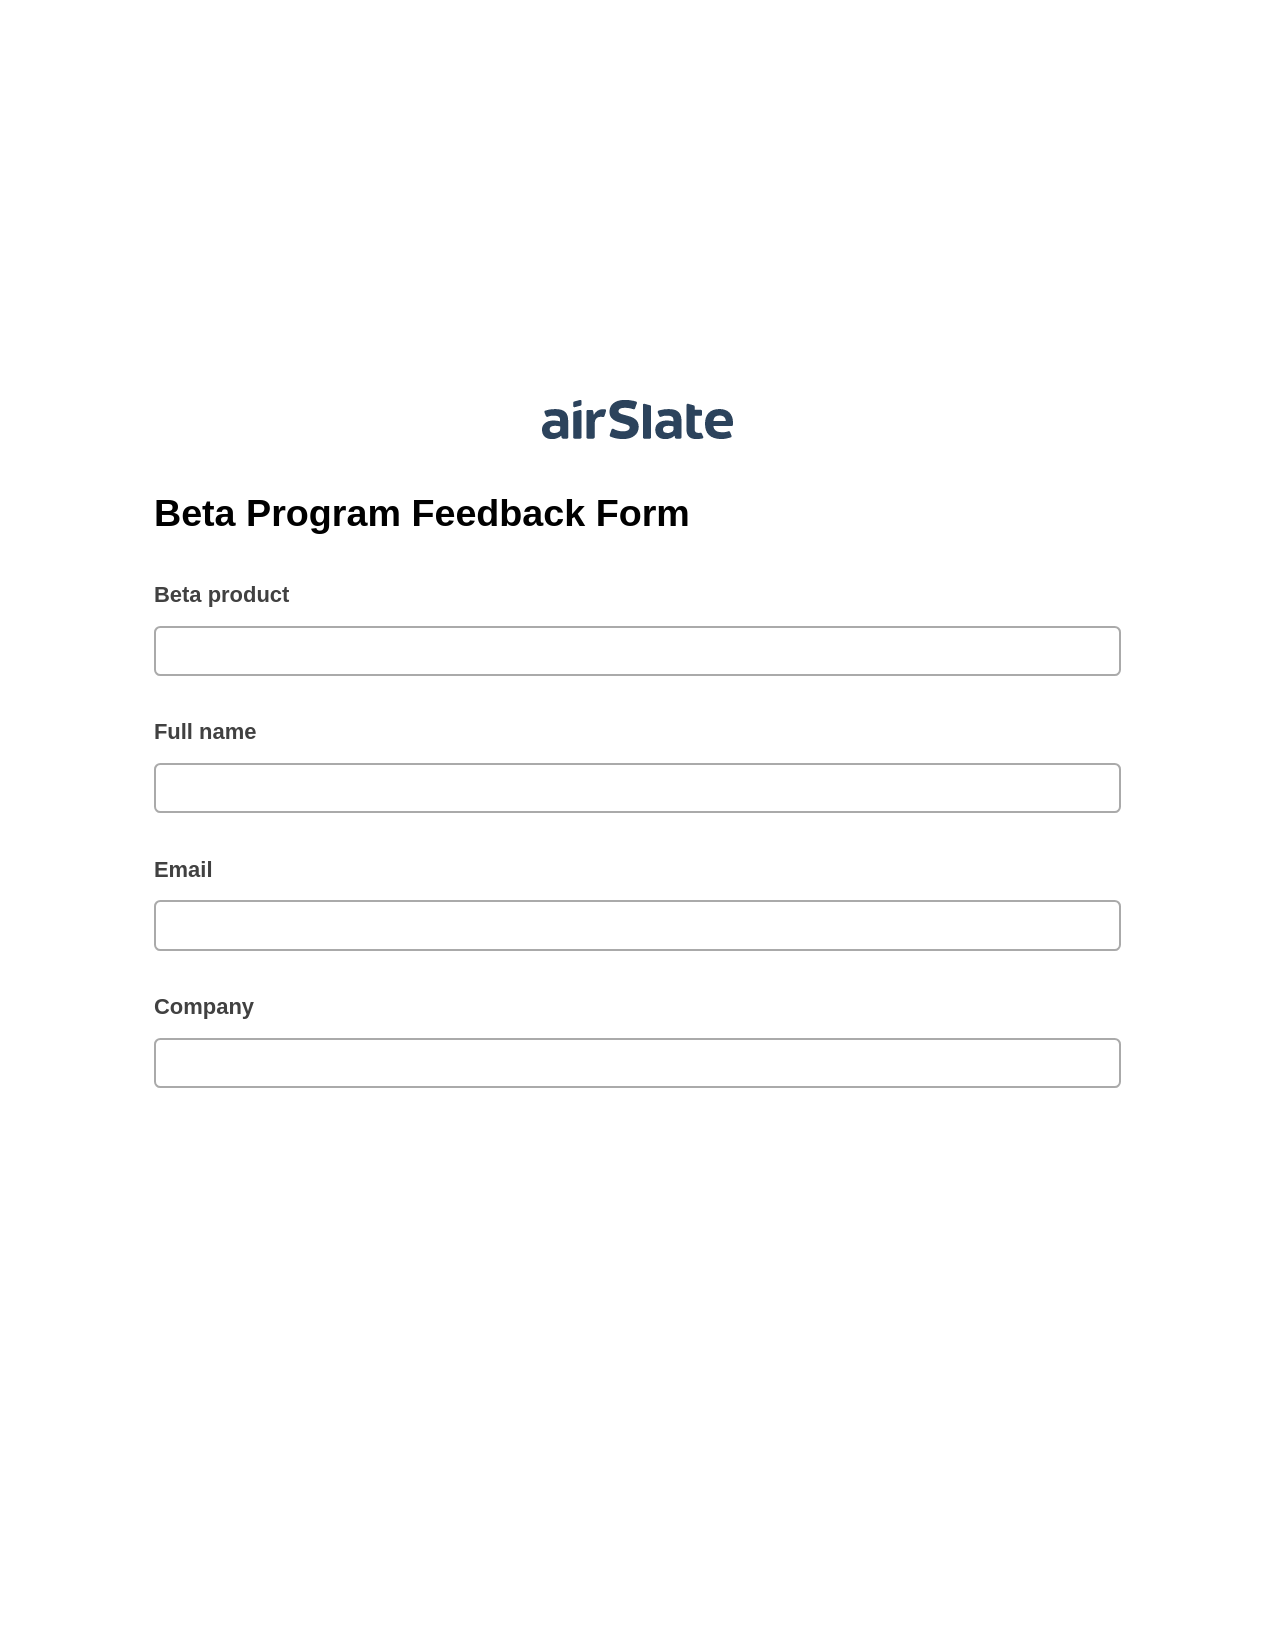 Multirole Beta Program Feedback Form Pre-fill from Salesforce Record Bot, Slack Notification Bot, Export to Formstack Documents Bot